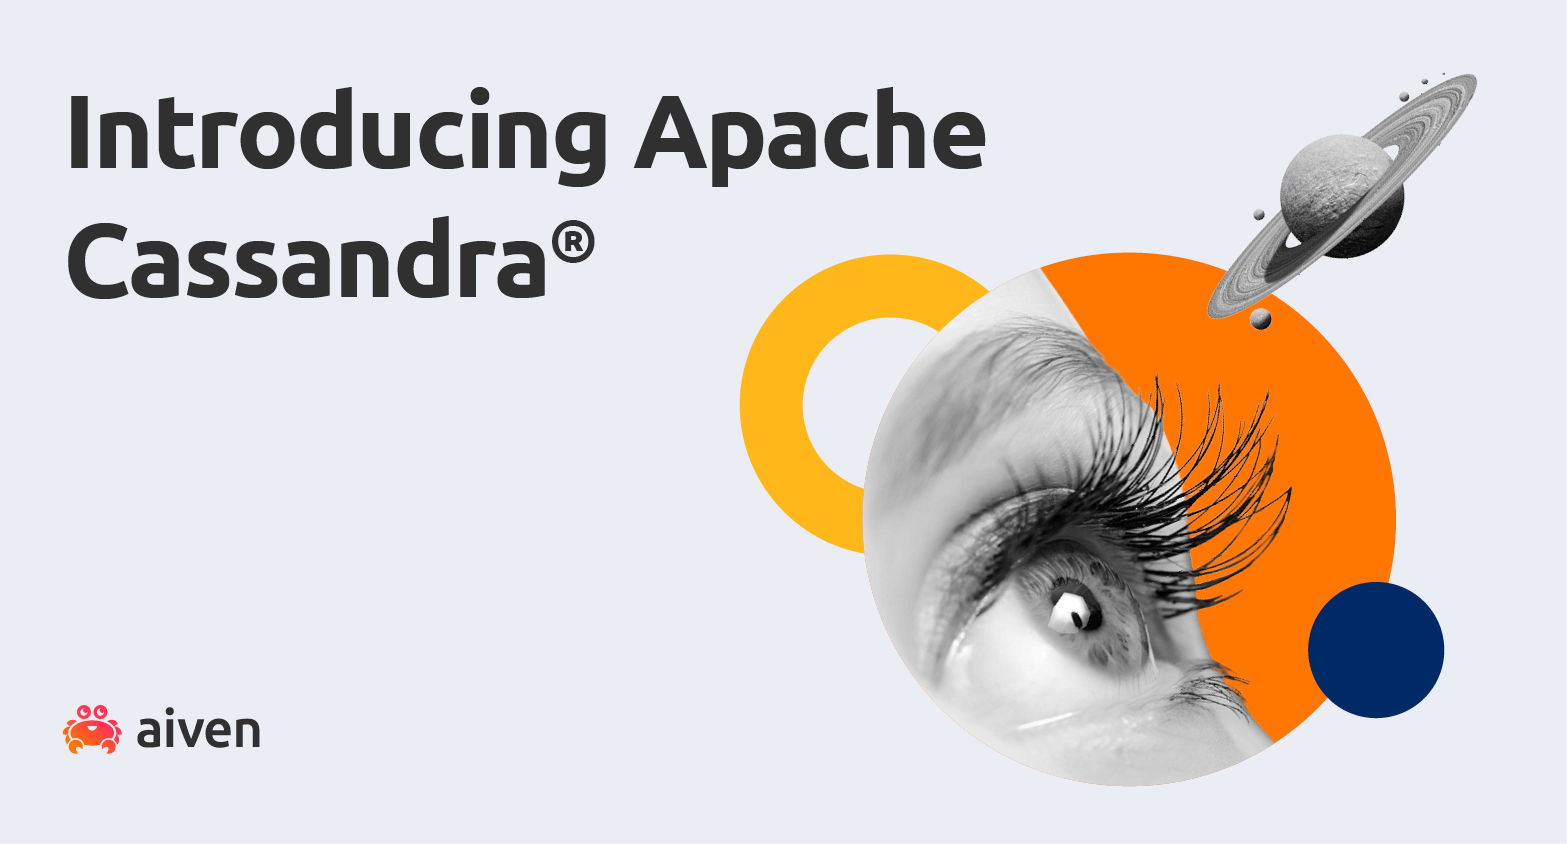 pace Talented Surroundings An introduction to Apache Cassandra®